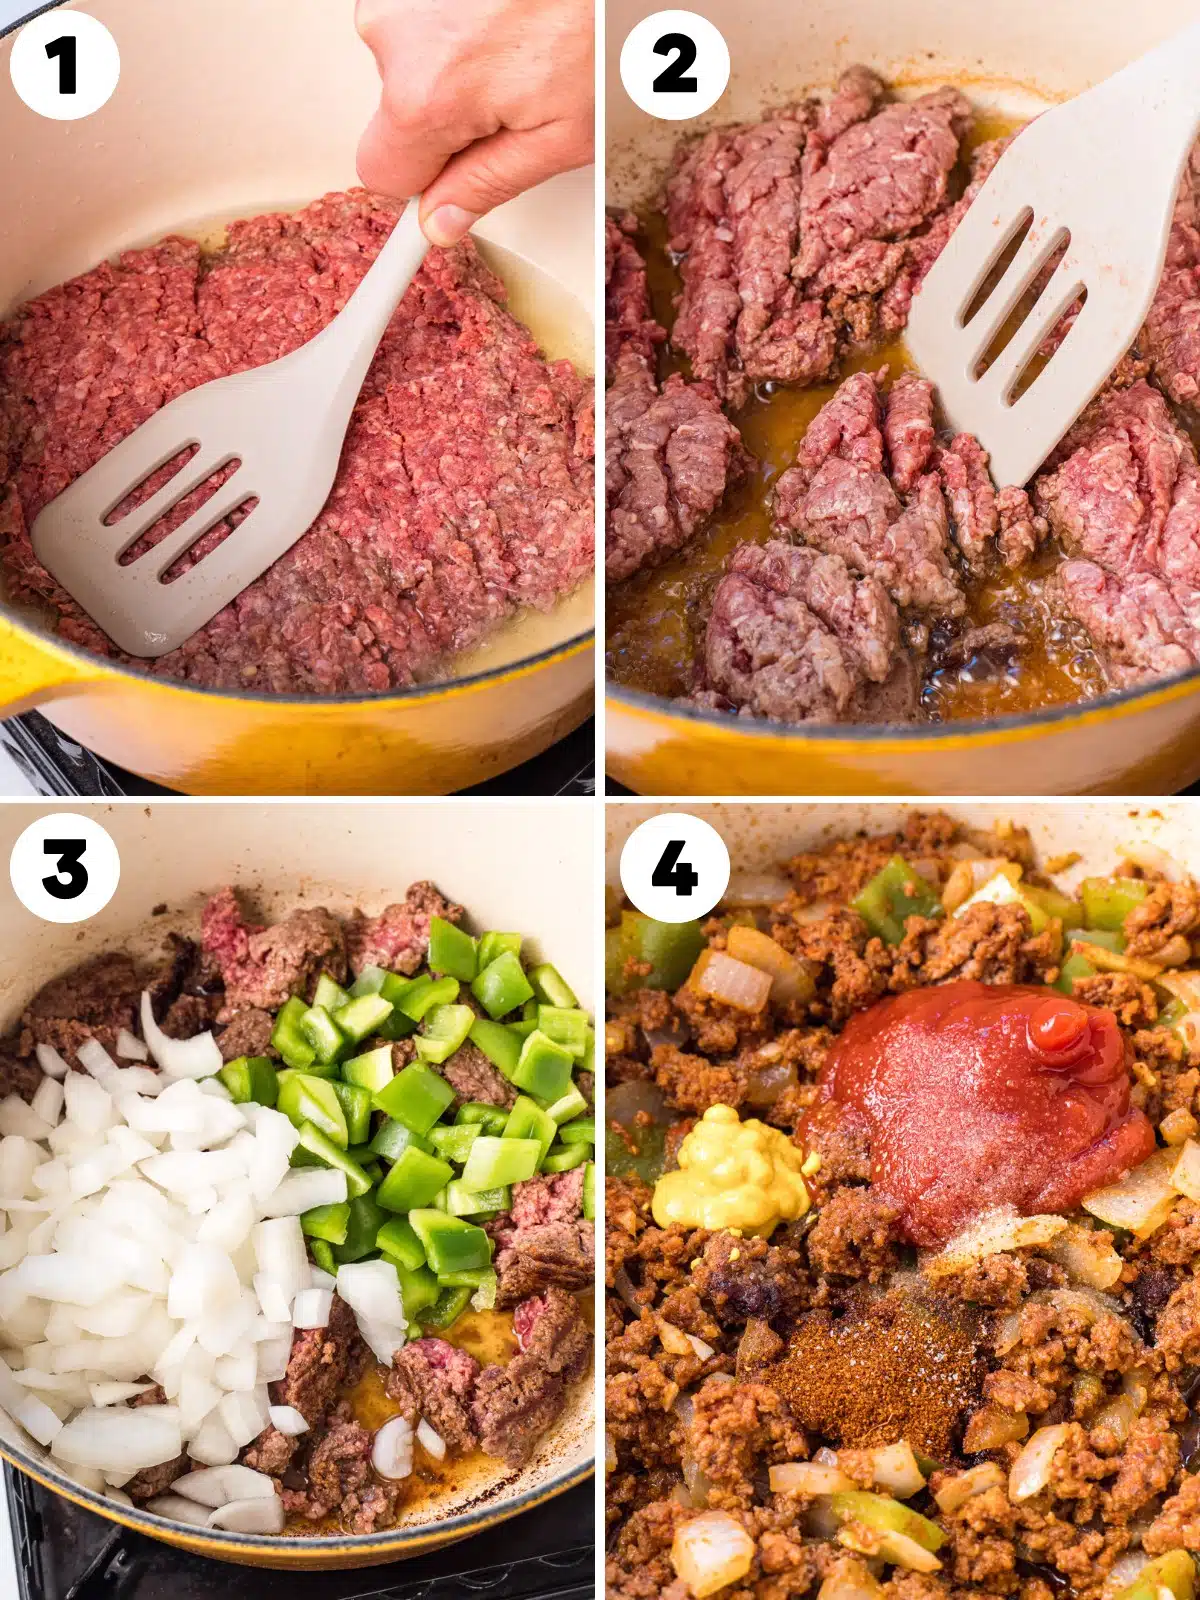 Top left: Ground beef begins to be browned in a pot for sloppy joes.
Top right: Ground beef browned in a pot.
Bottom left: Chopped onion, chopped green bell pepper, and ground beef cooking in a pot.
Bottom right: Ingredients for sloppy joes cooking in a pot including the cooked ground beef and vegetables plus ketchup, mustard, chili powder, and more.